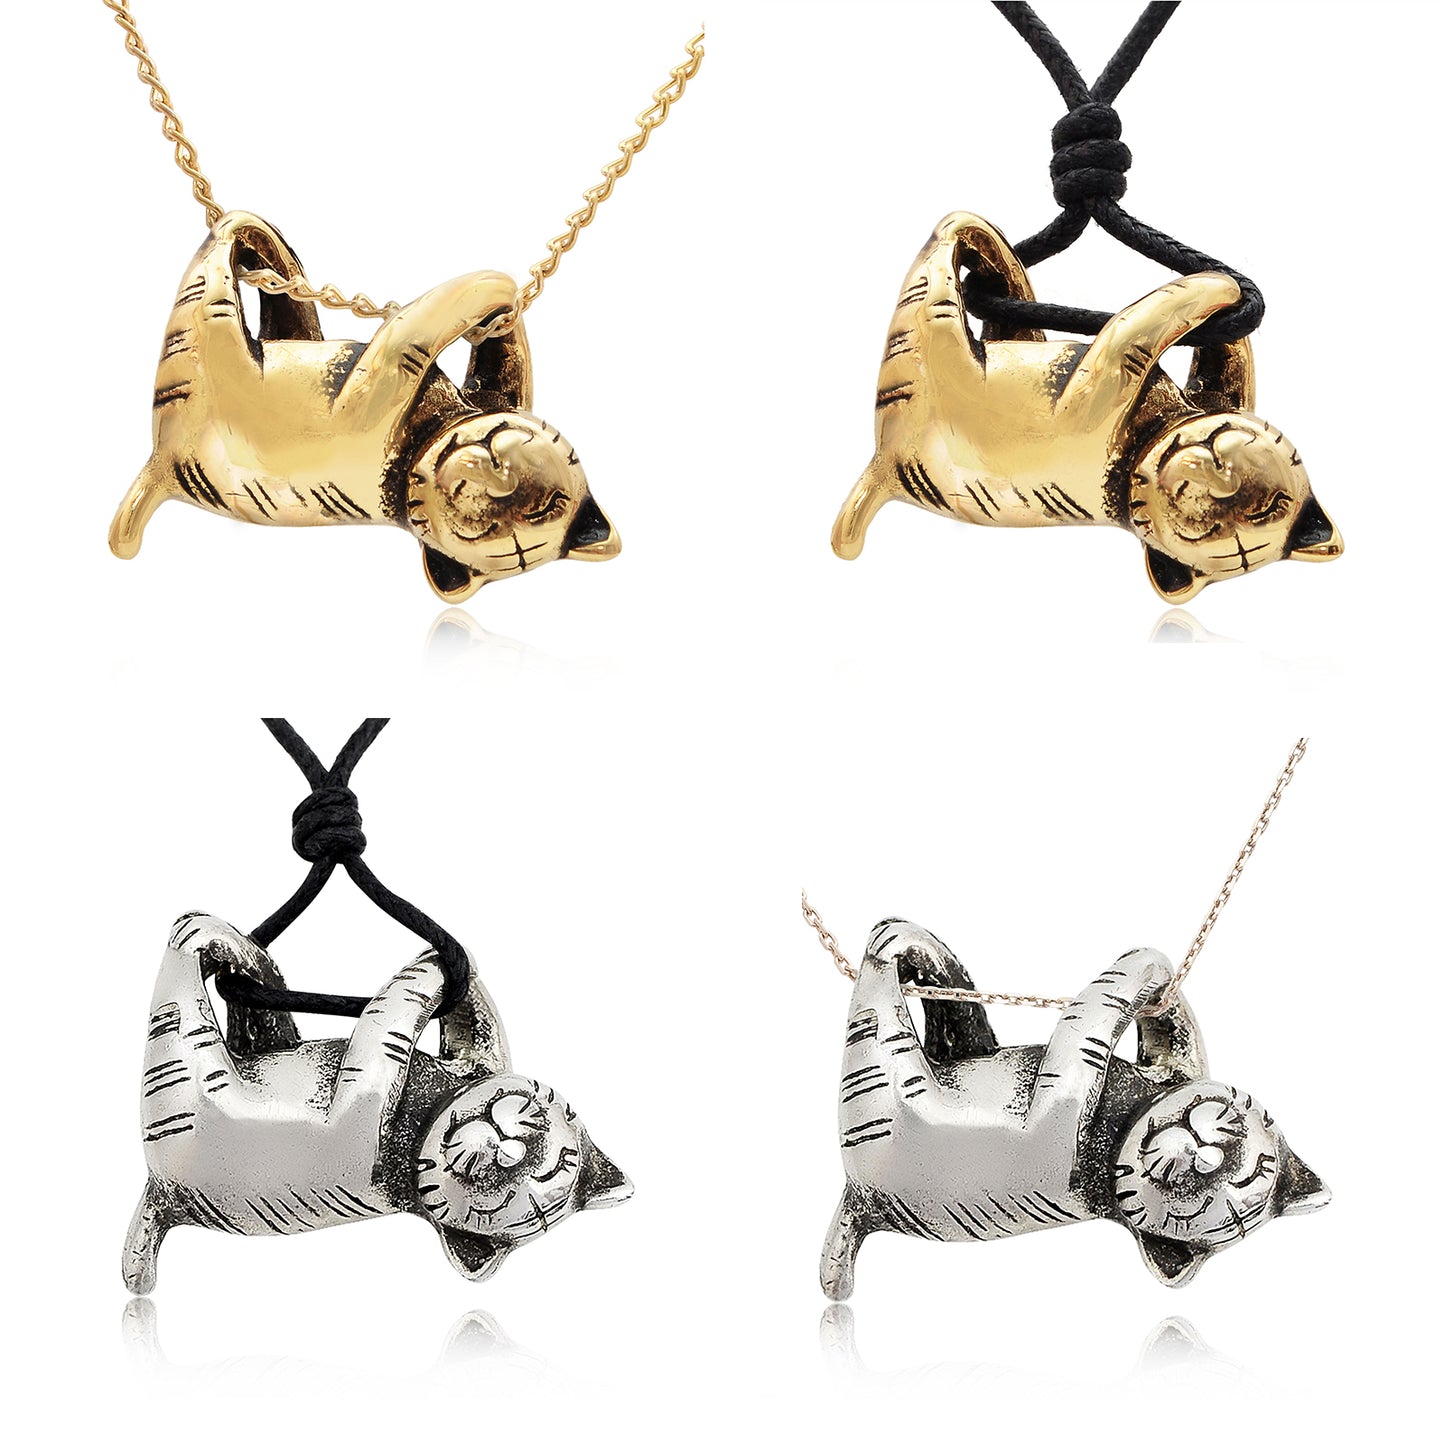 New Relaxing Cat Feline Silver Pewter Gold Brass Charm Necklace Pendant Jewelry